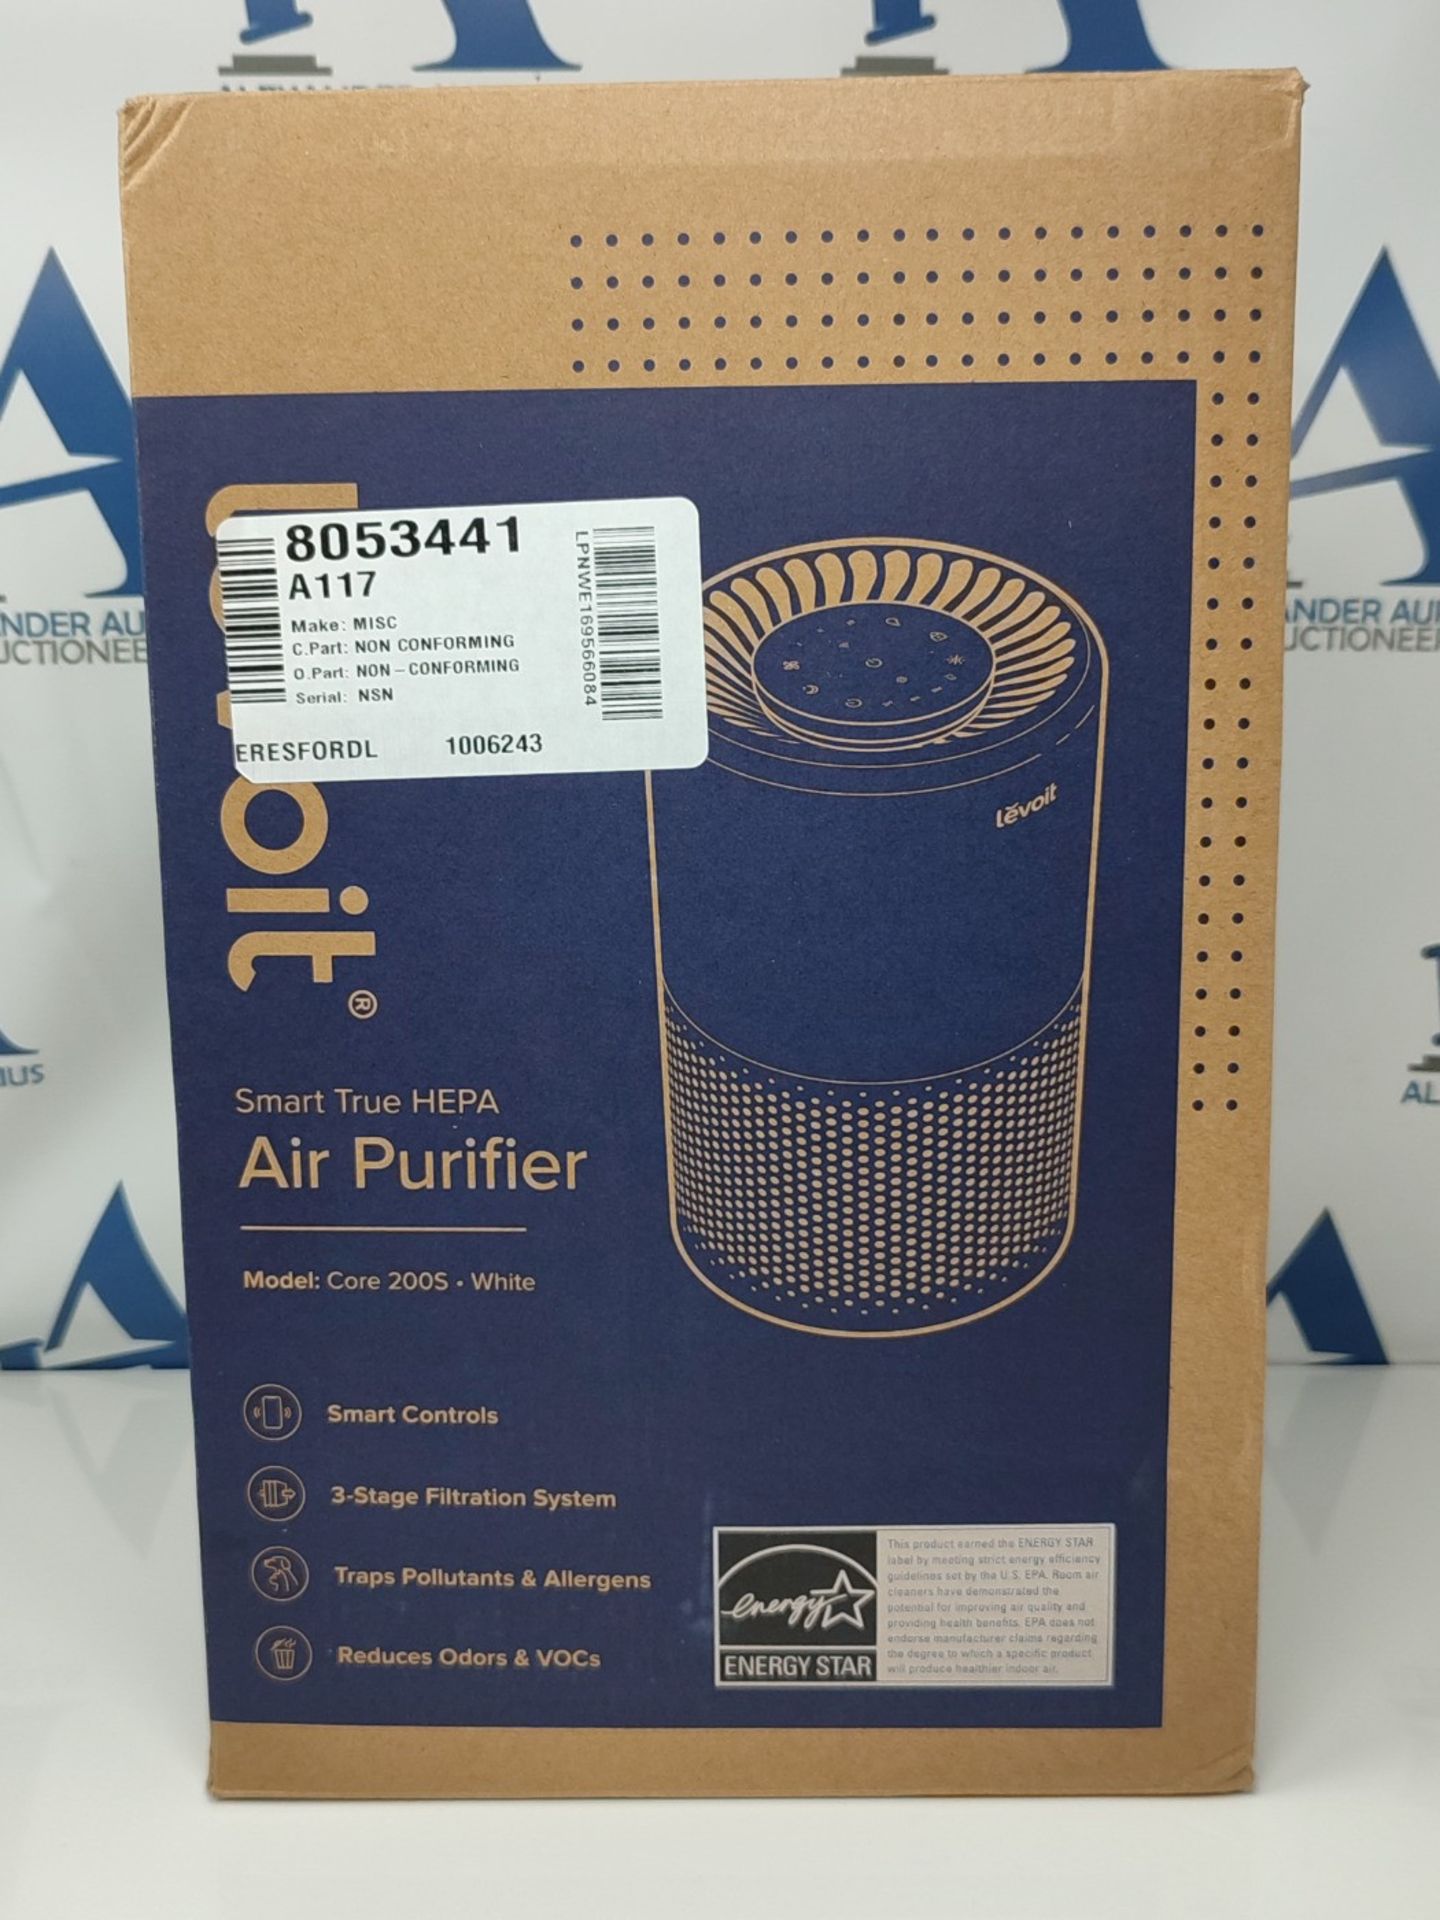 RRP £76.00 LEVOIT Smart WiFi Air Purifier for Home, Alexa Enabled H13 HEPA Filter, CADR 170m³/h, - Image 2 of 3